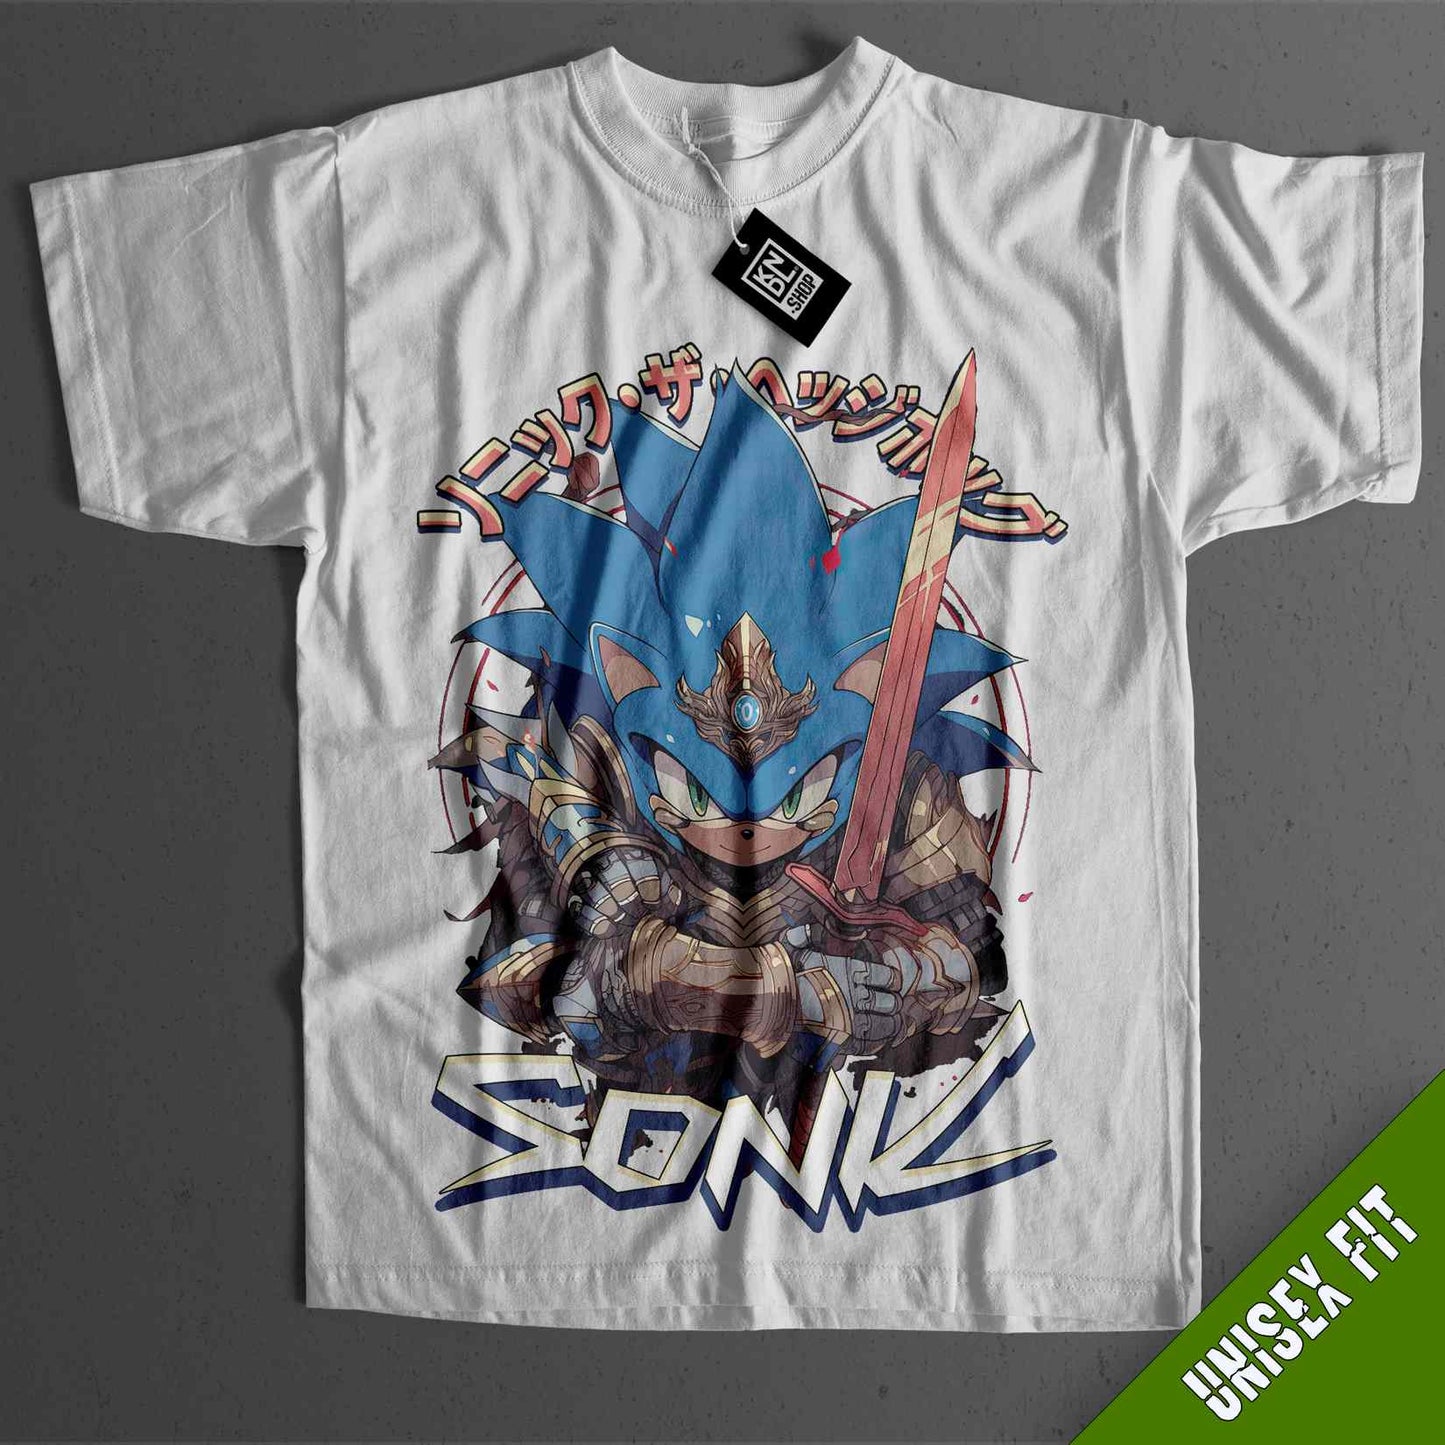 a t - shirt with a picture of a sonic character on it